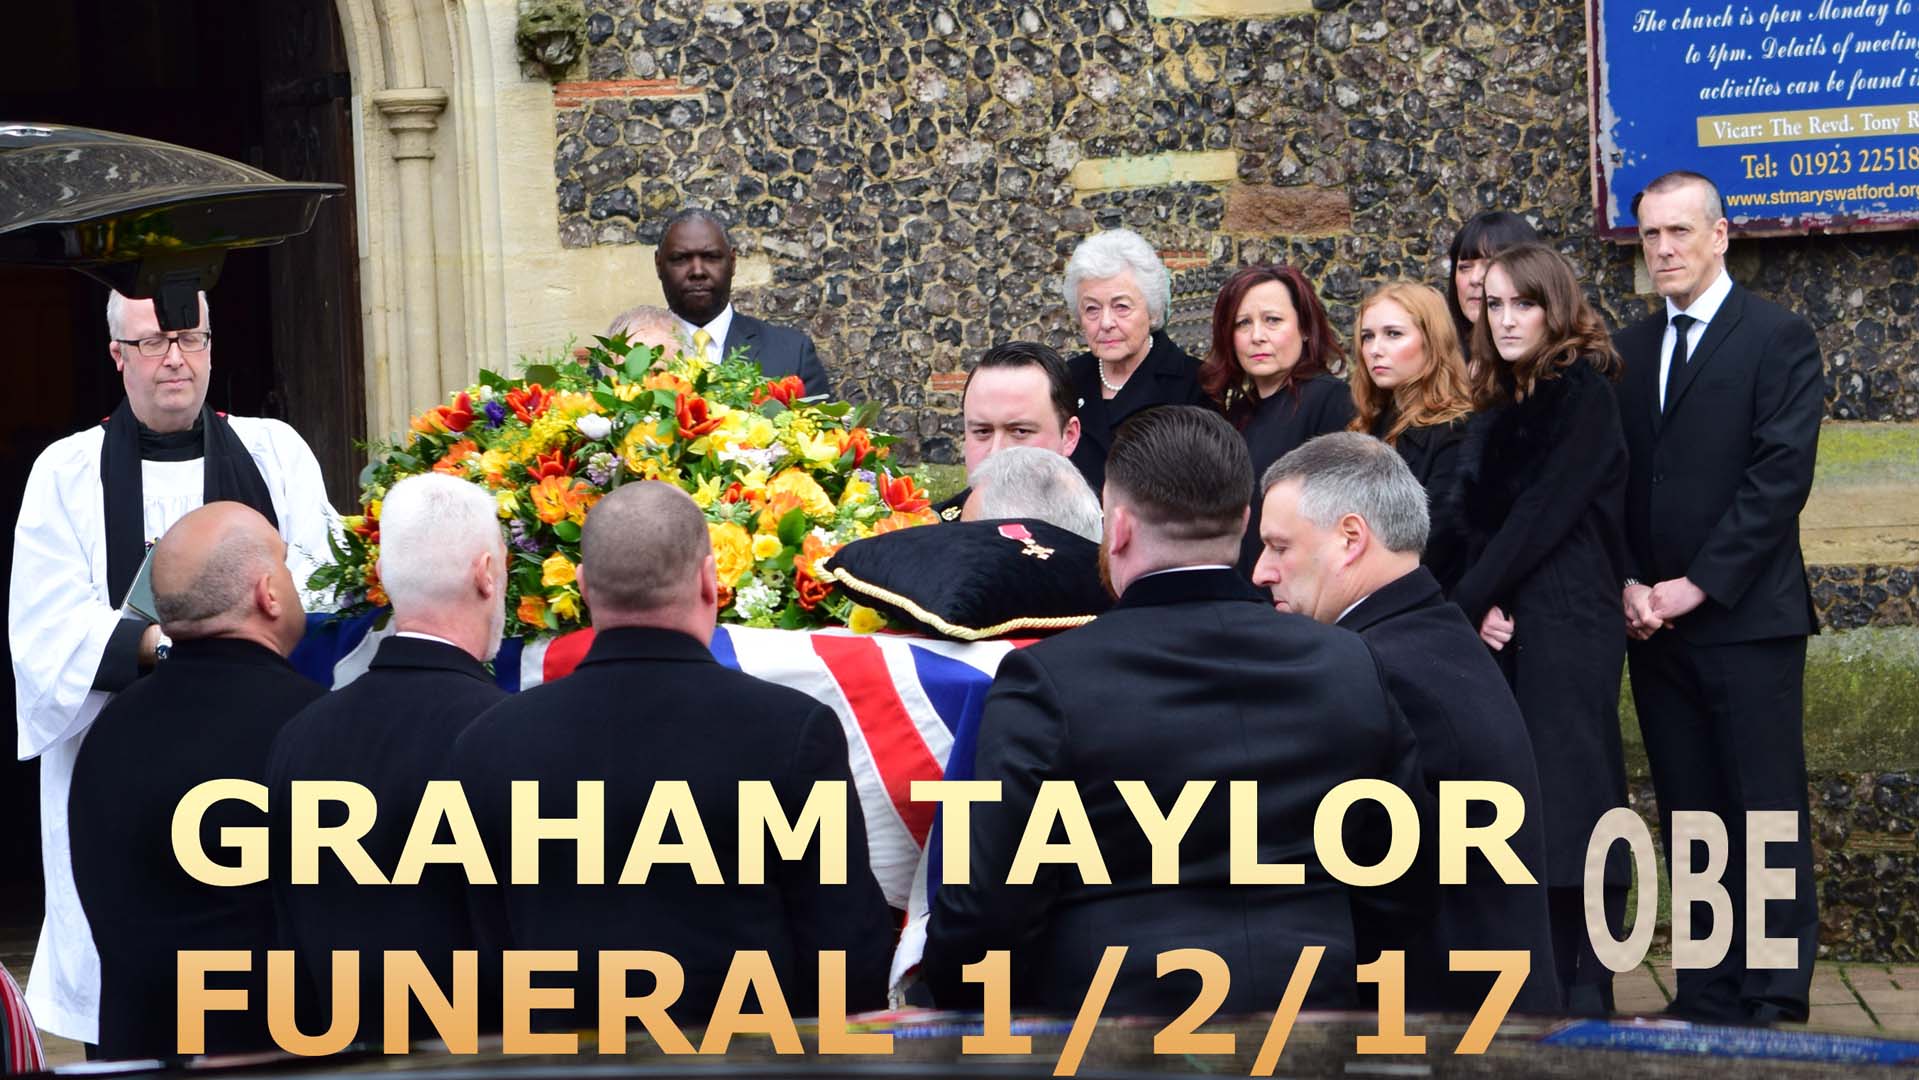 Graham Taylor's funeral attracts hundreds of mourners in Watford